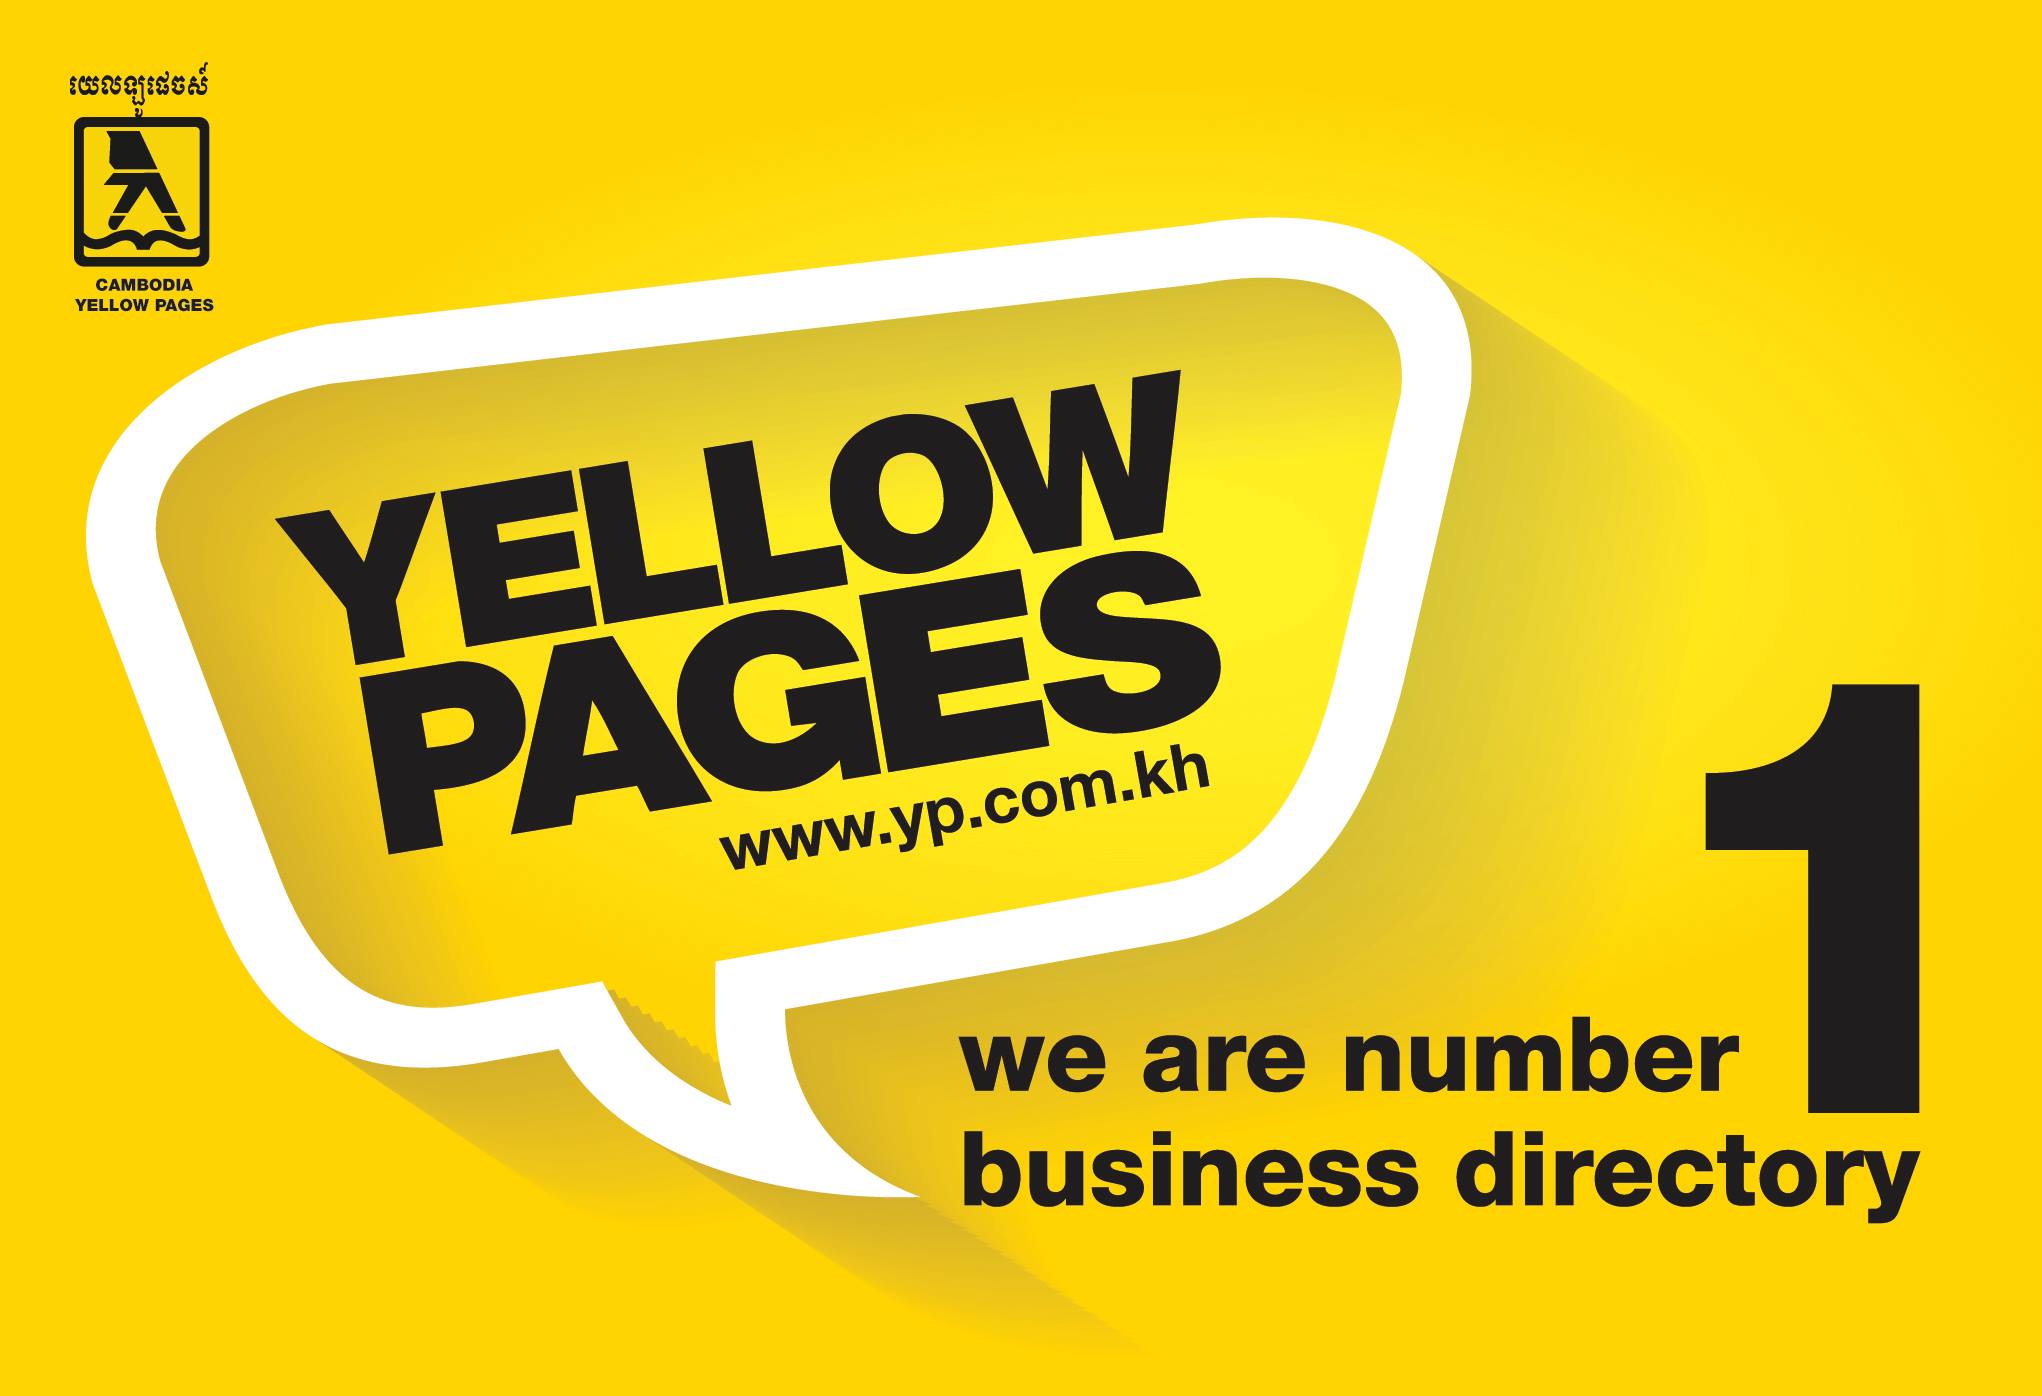 YP.com Logo - Cambodia Yellow Pages - Company - Local Business